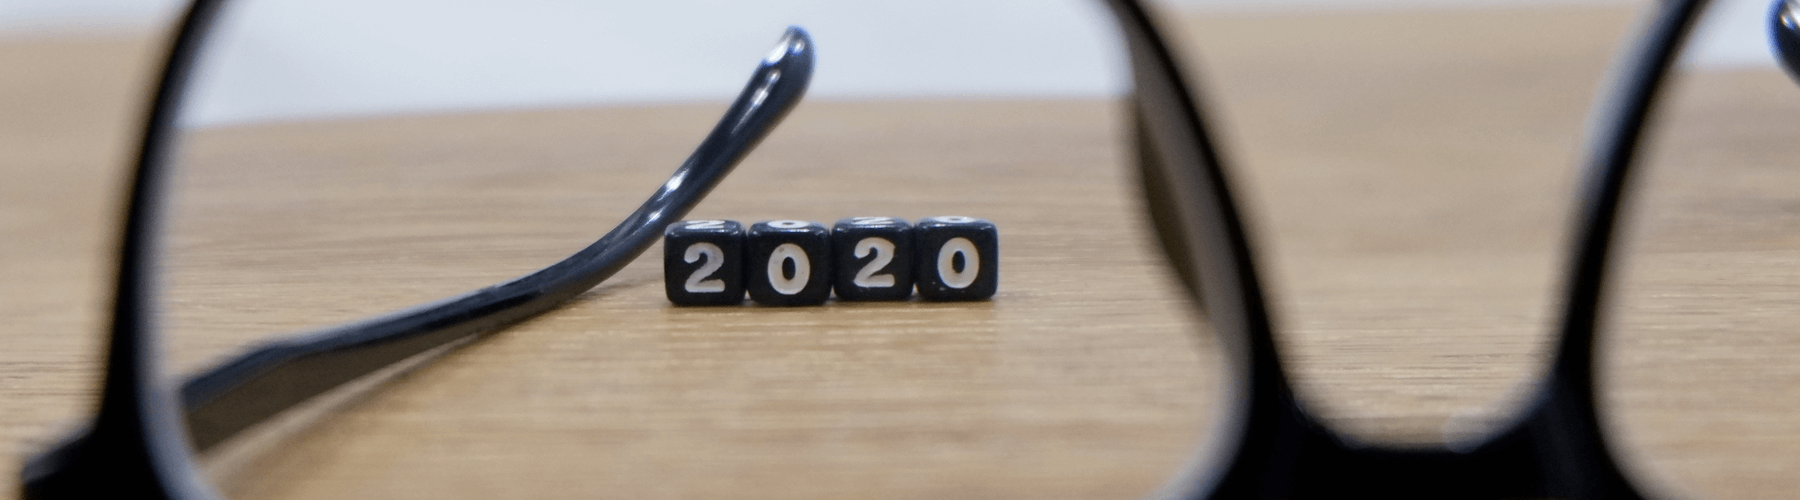 Glasses on wooden table with selective focus on cubes that read 2020